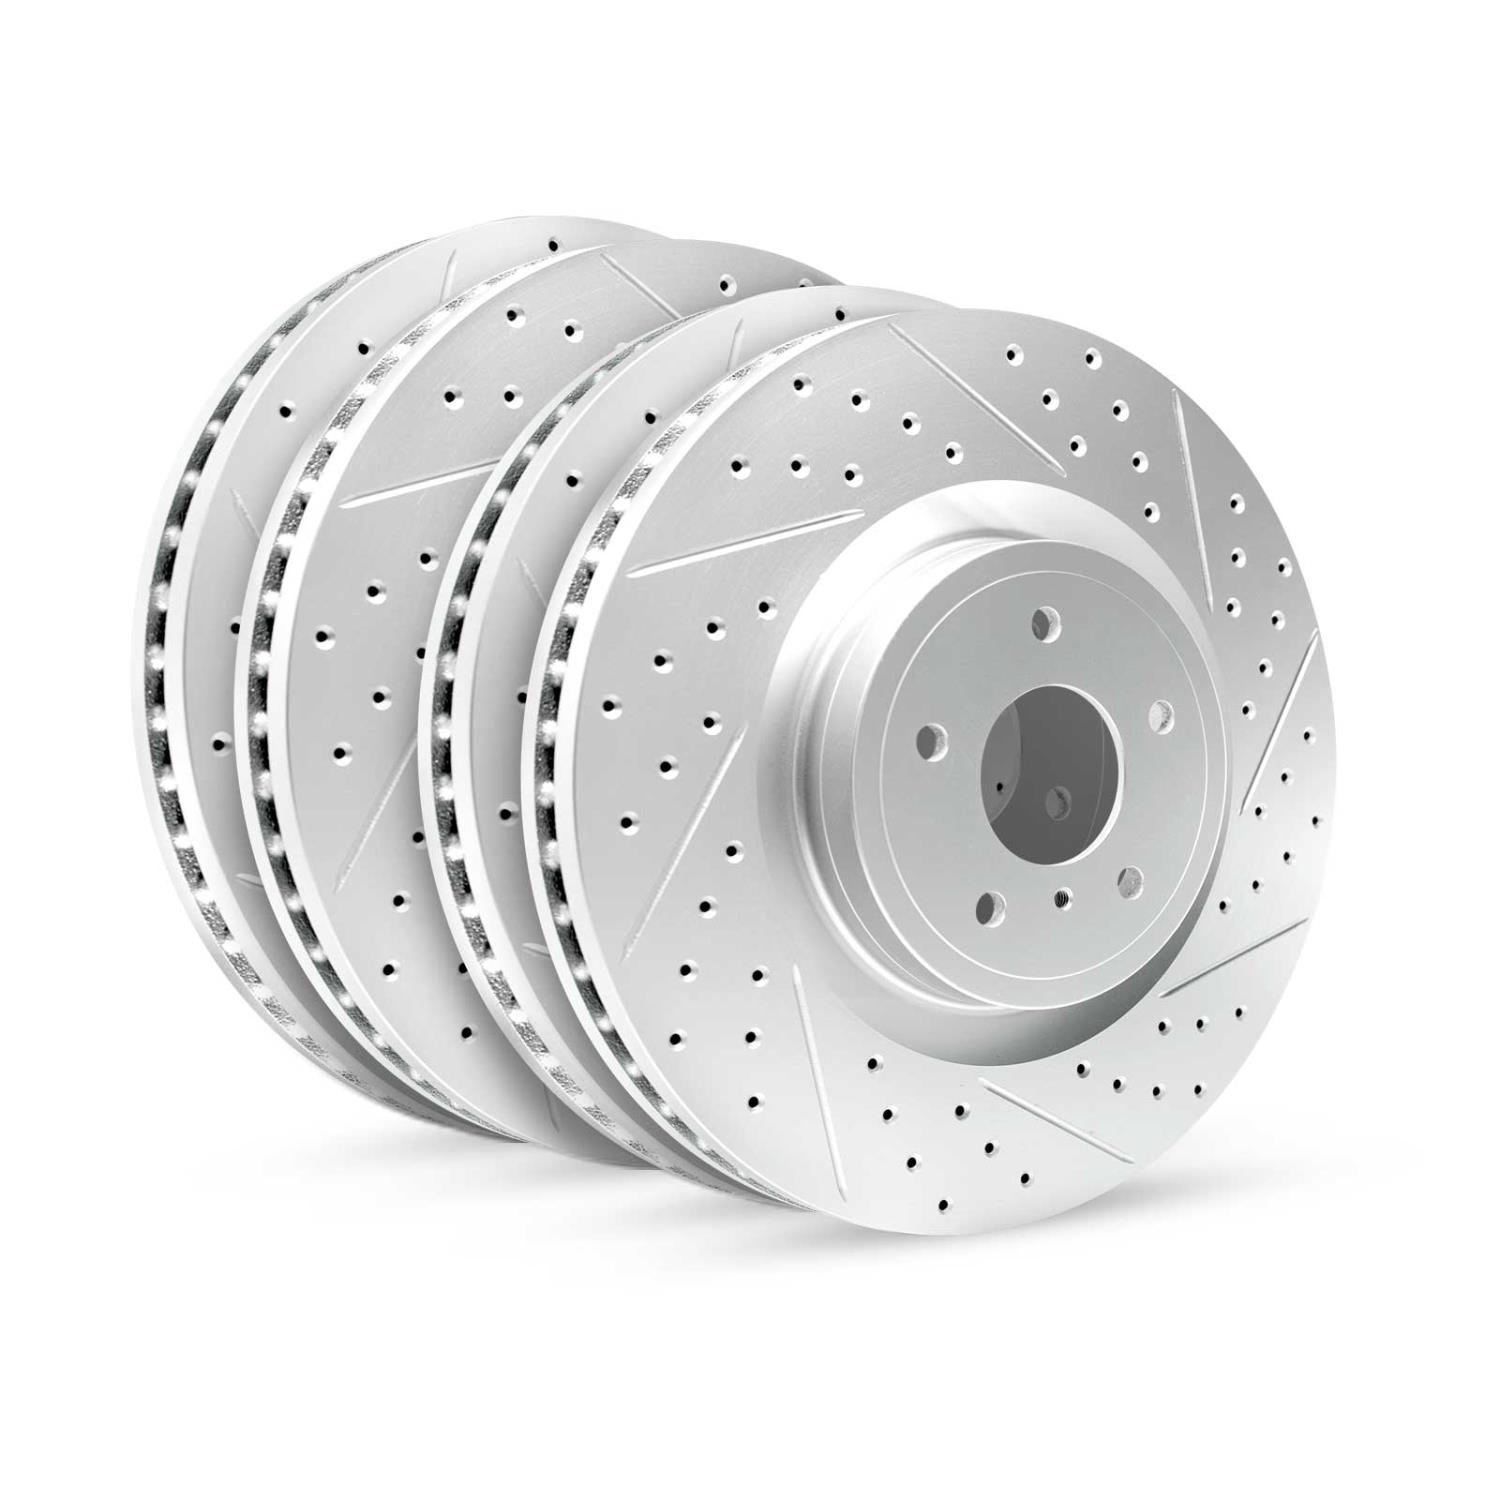 GEO-Carbon Drilled/Slotted Rotors, 2011-2018 BMW, Position: Front/Rear